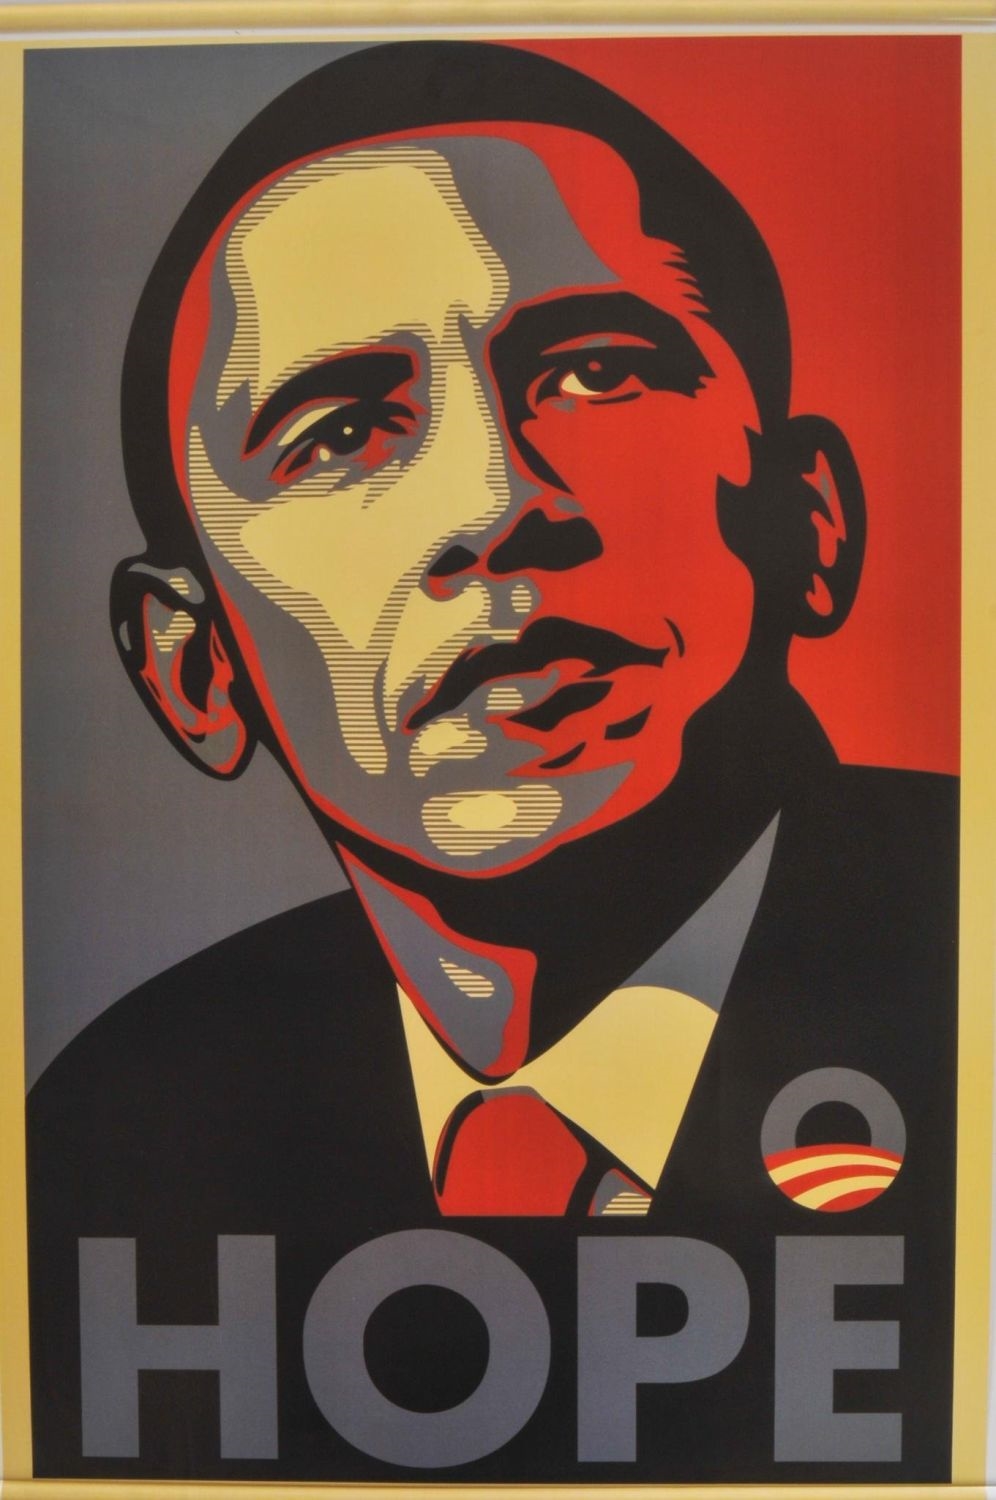 Artwork by Shepard Fairey, Obama Hope Poster, Made of Offset lithograph